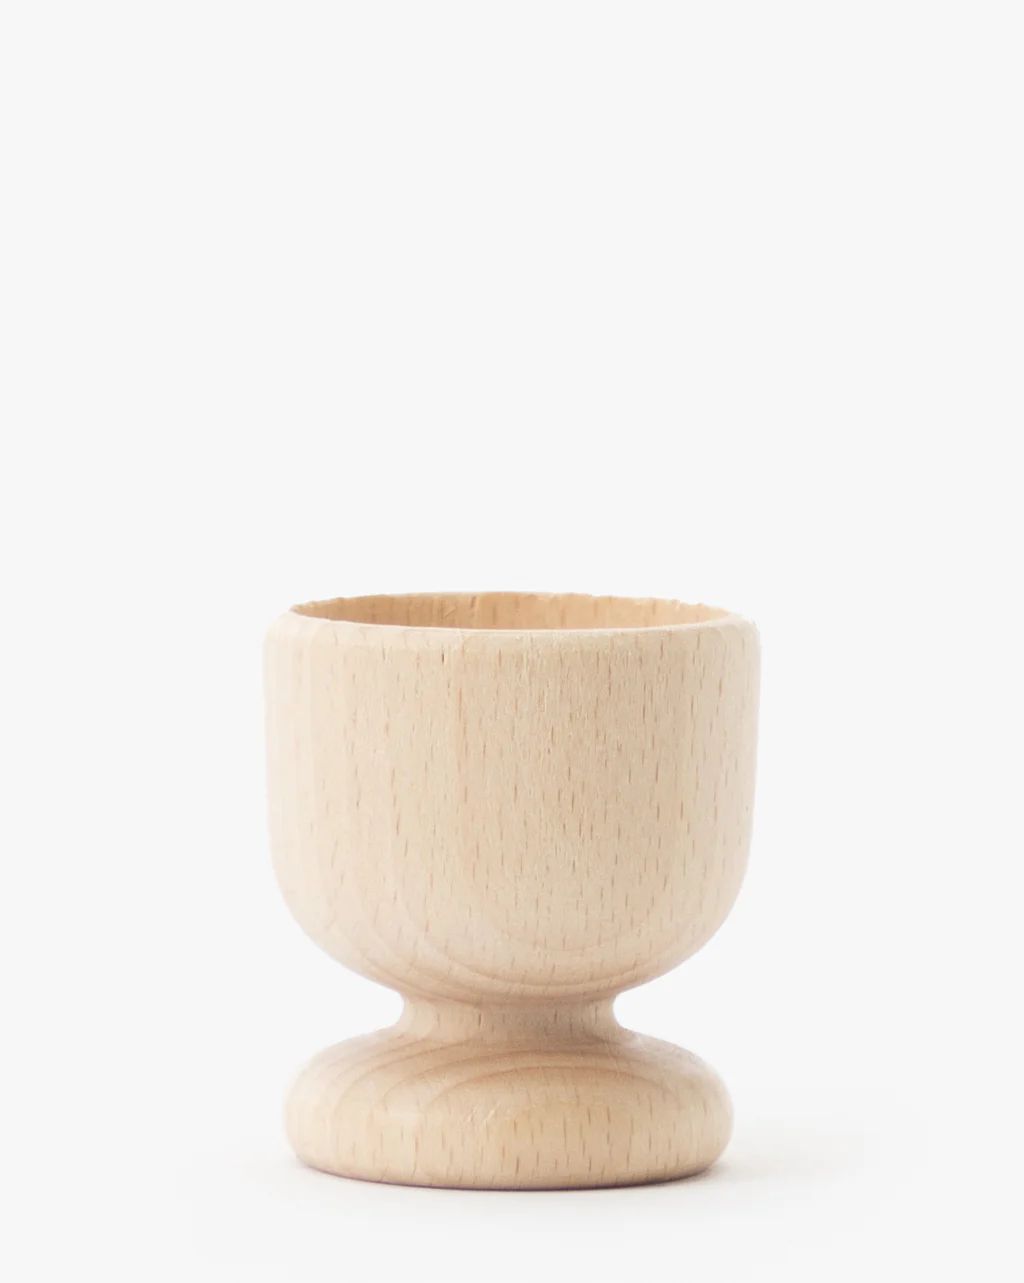 Wooden Egg Cup | McGee & Co.